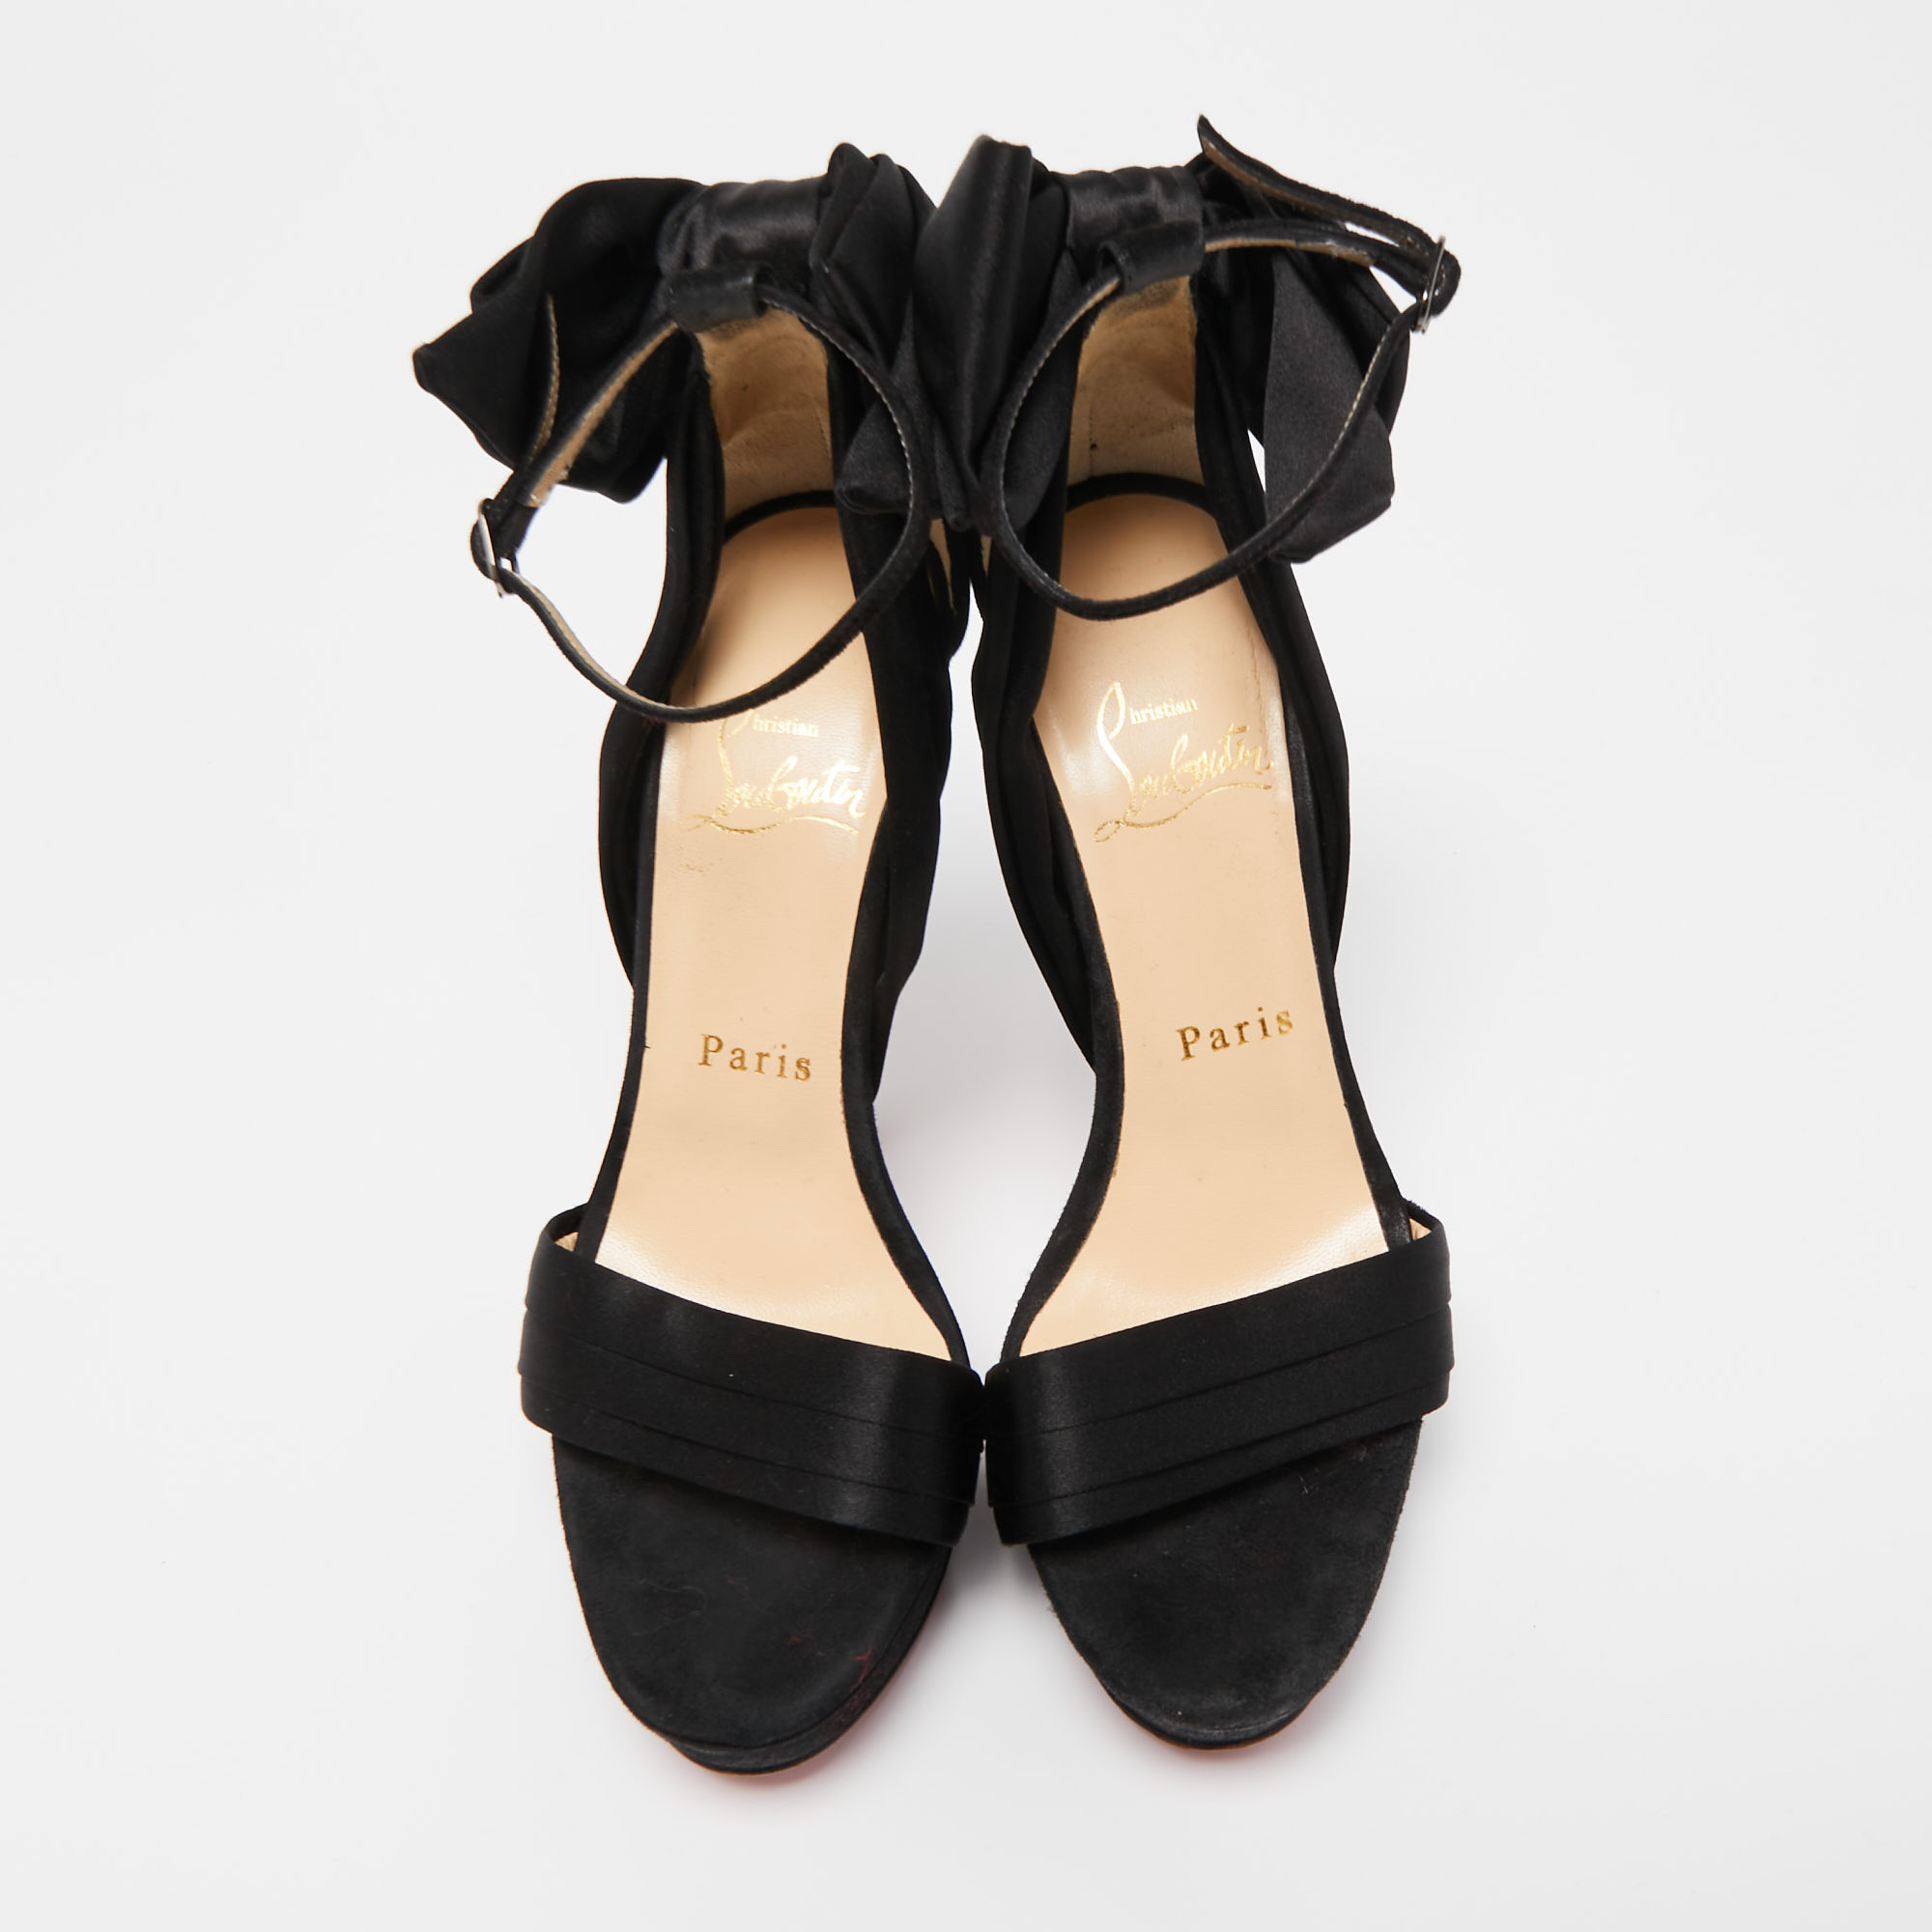 Christian Louboutin Black Satin And Suede Vampanodo Bow Platform Ankle Strap Size 35.5